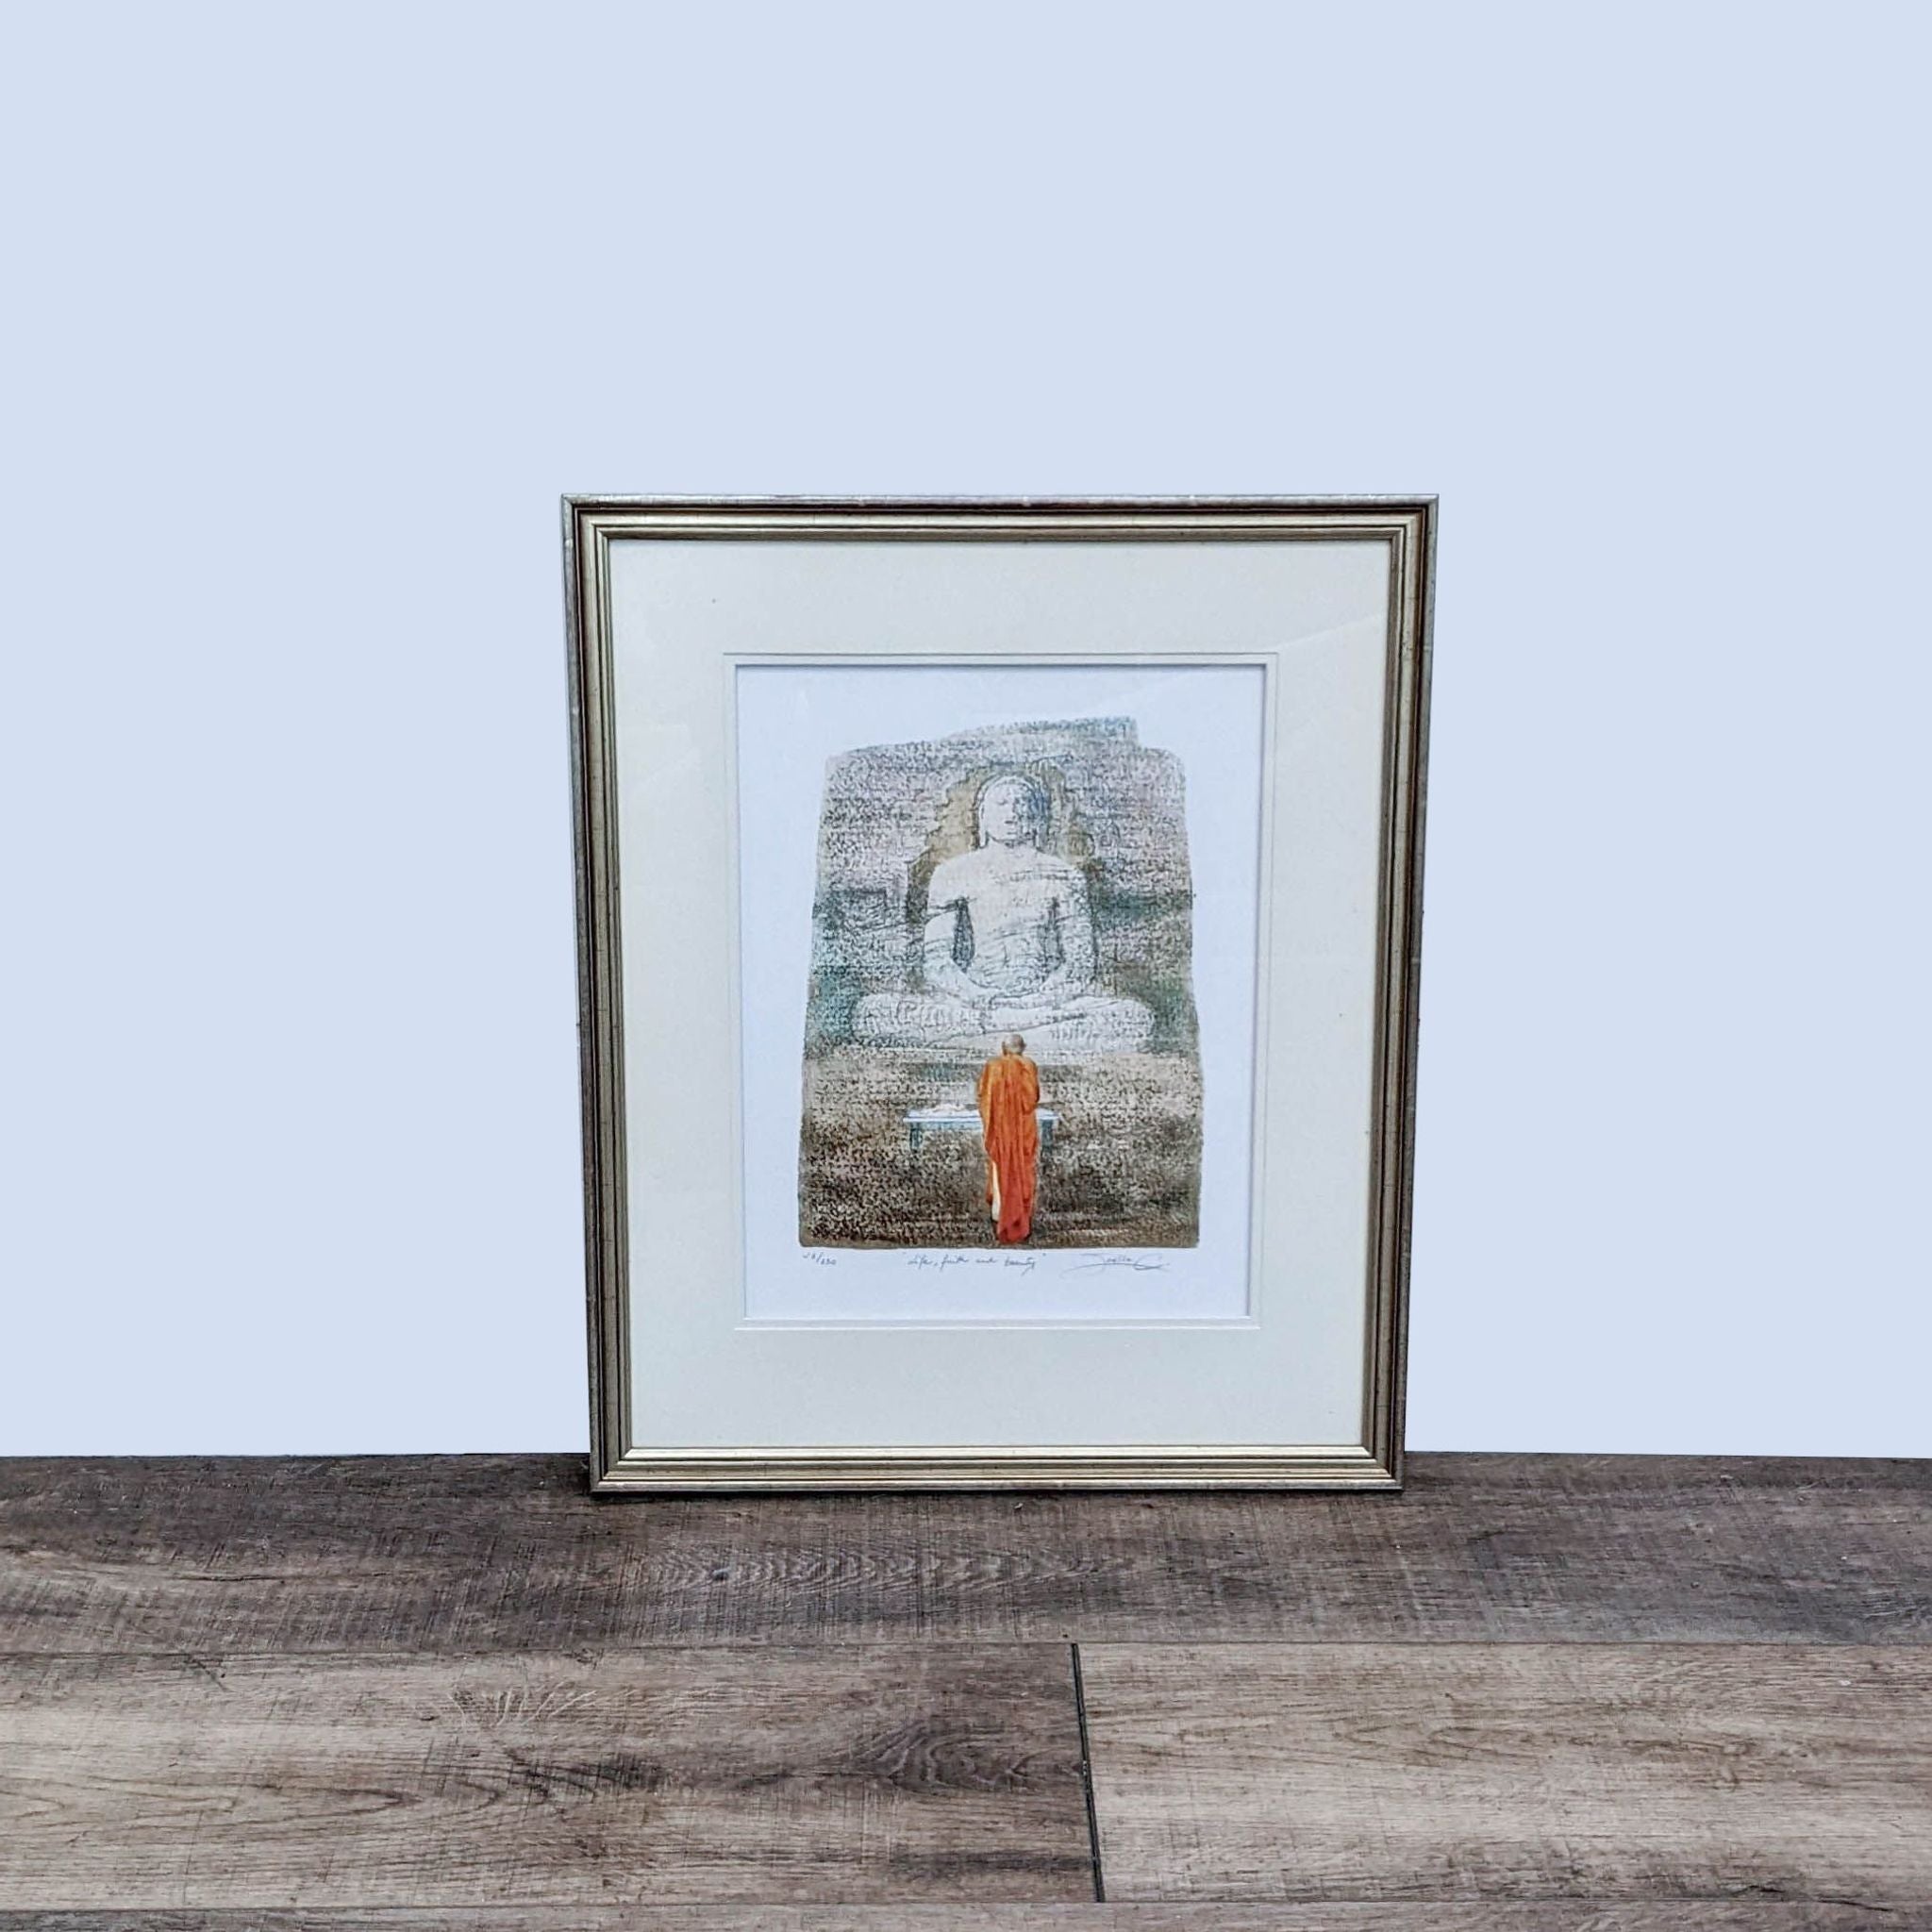 Framed "Life, Faith and Beauty" Giclee art by Joelle C., print 28/250 from Reperch, depicting a serene figure with a red-robed person.